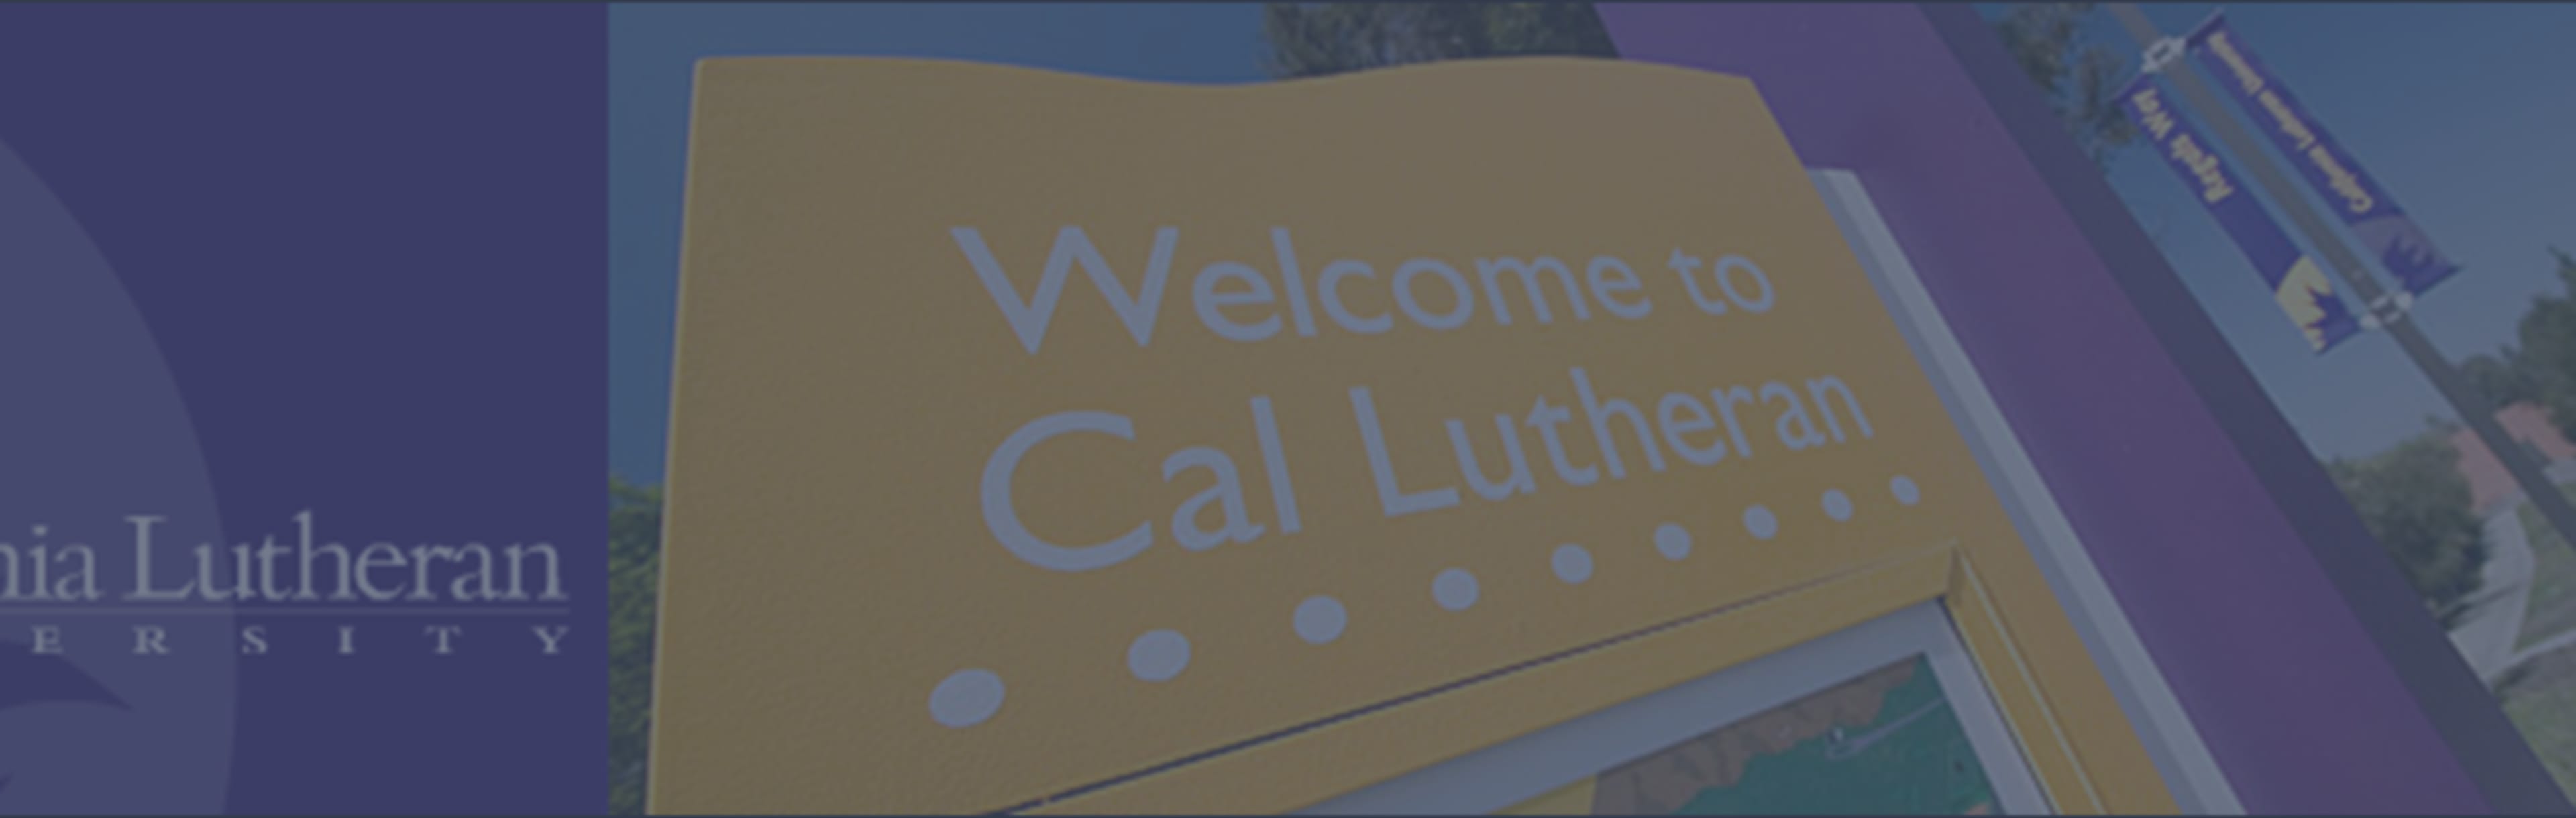 California Lutheran University Master of Business Administration